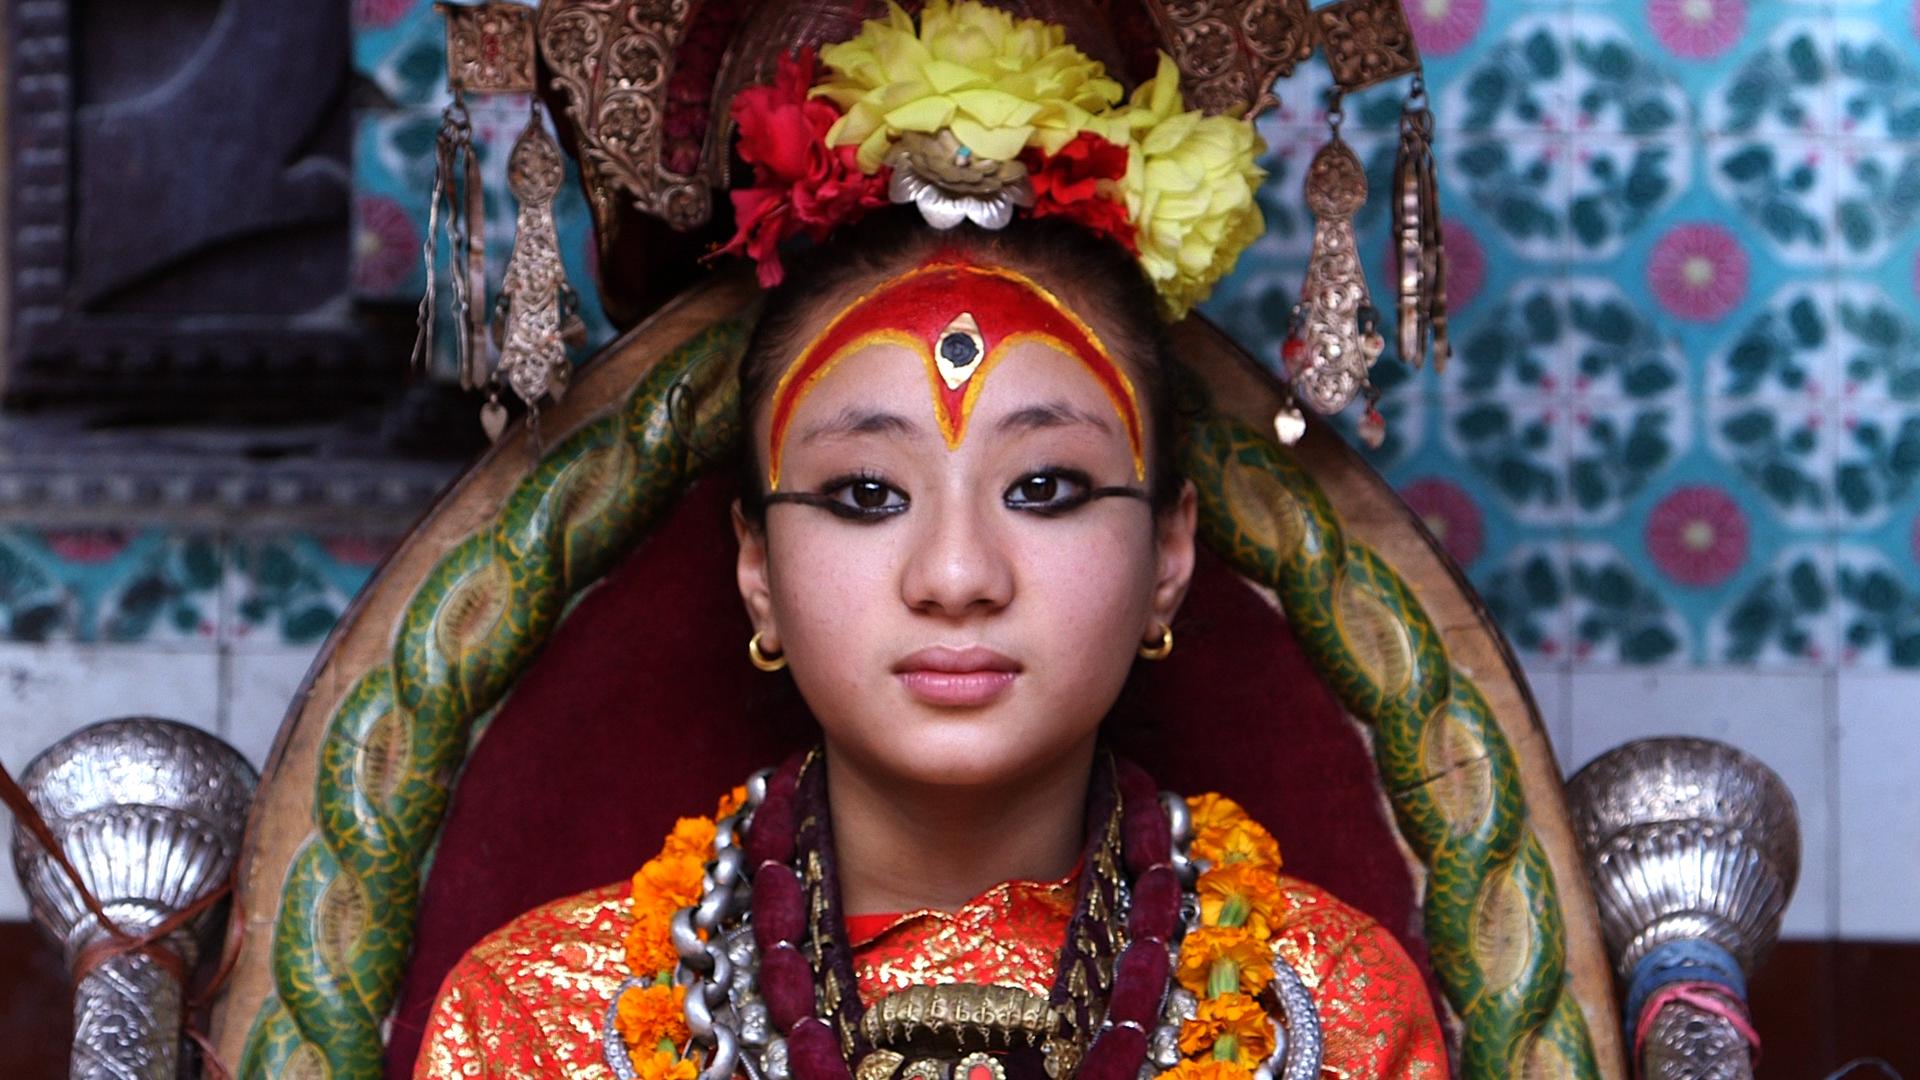 The Living Goddess, known as a Kumari Devi, is worshipped in Nepal by Hindus and Buddhists alike. Each Kumari Devi is chosen at a very young age. Samita, the girl in this picture, is no longer a Kumari Devi. Since the photo was taken, she started mentruat